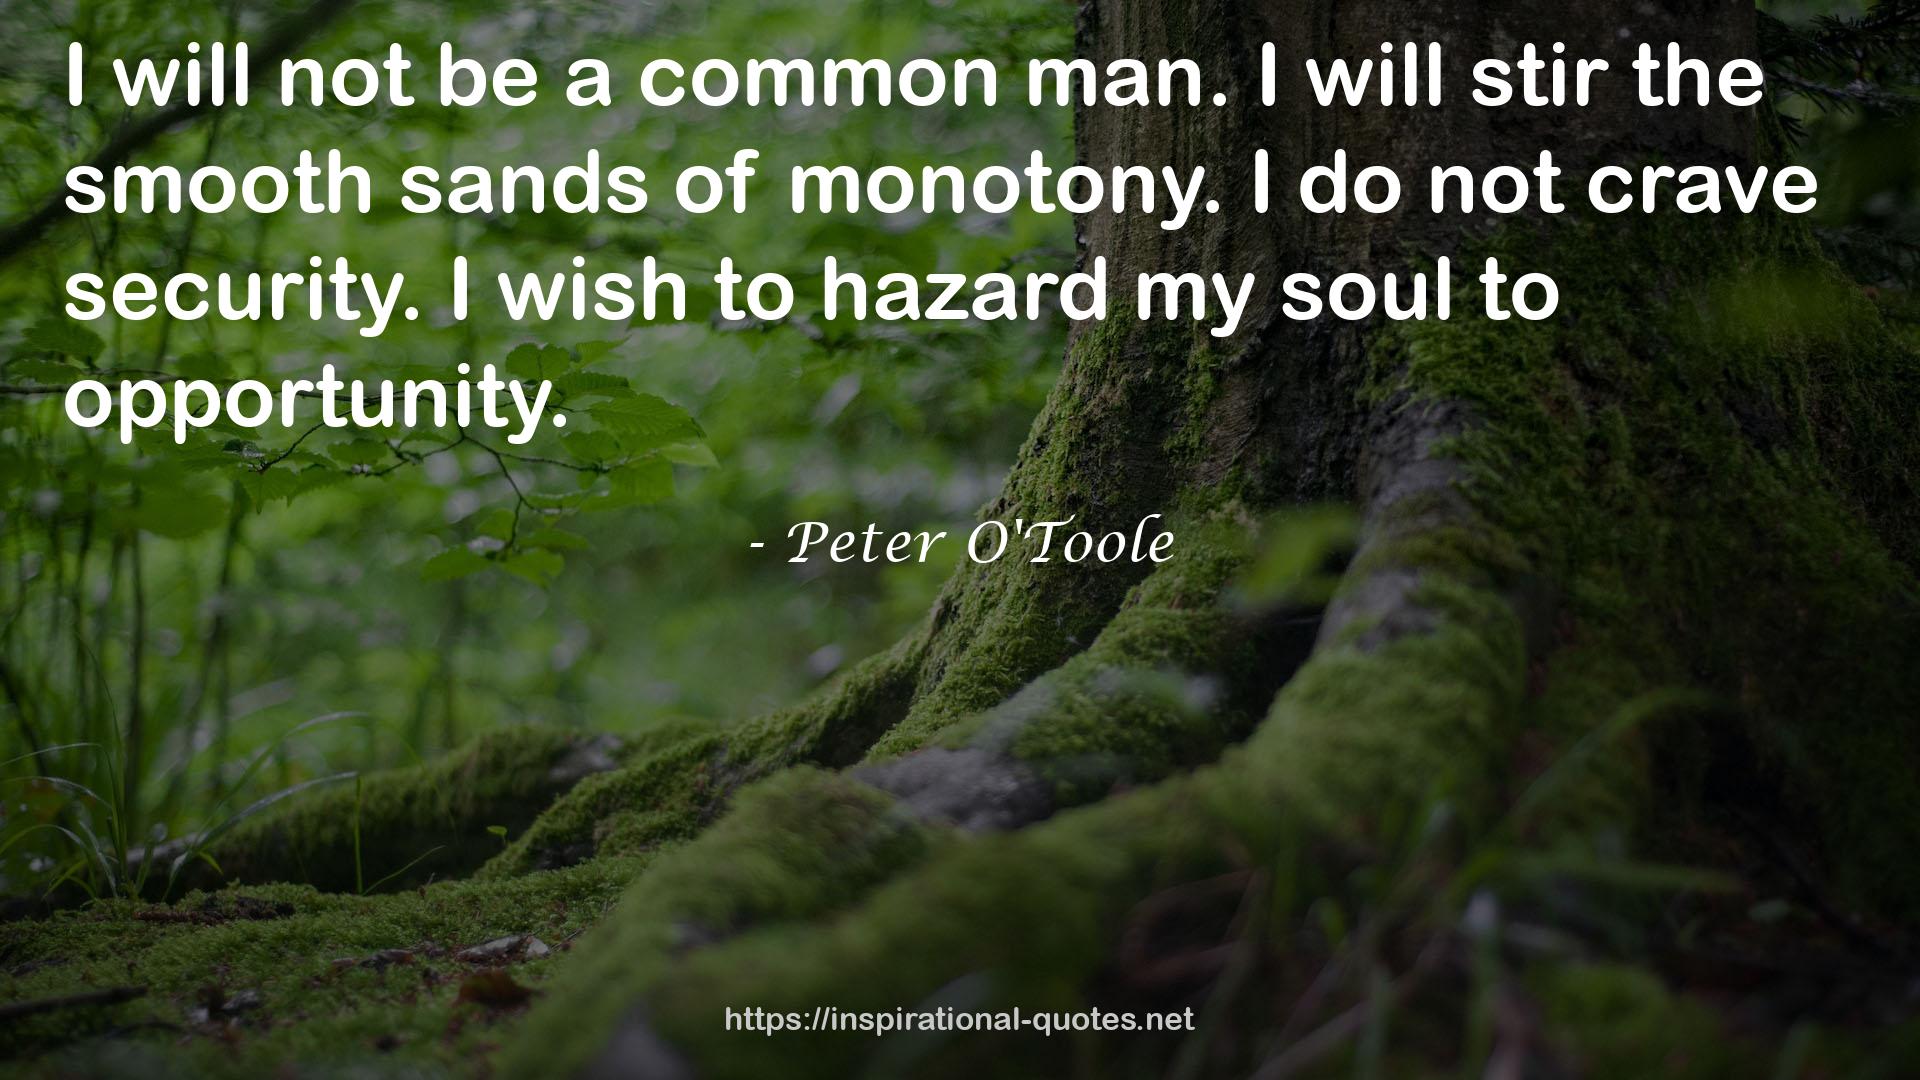 Peter O'Toole QUOTES